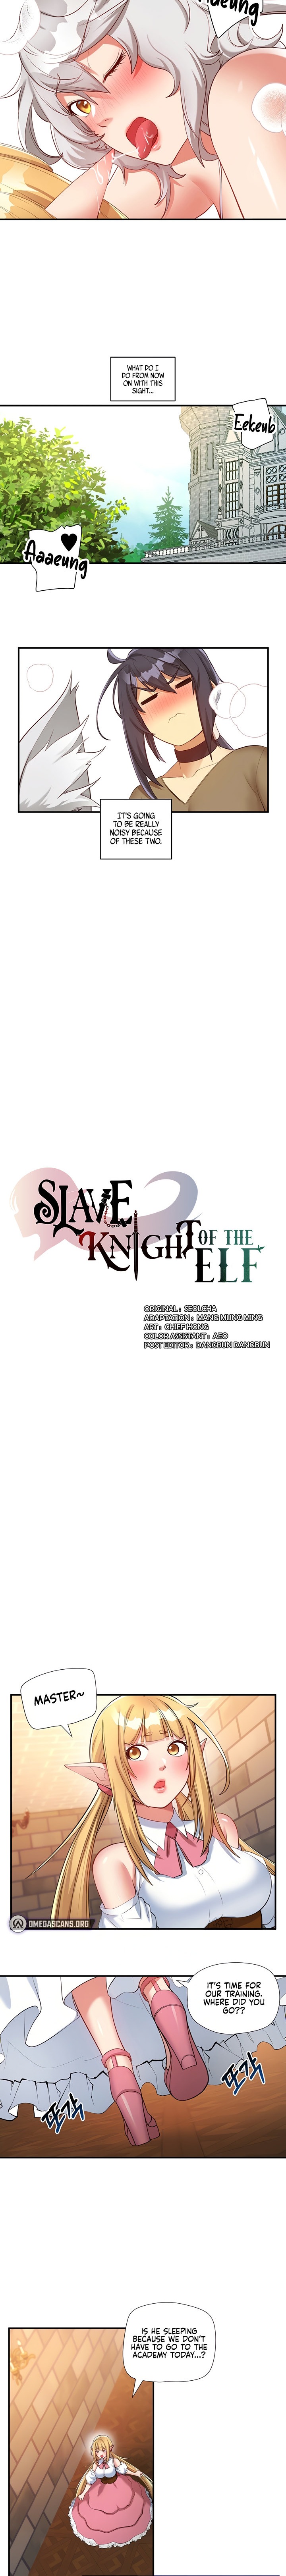 Slave Knight of the Elf - Chapter 47 Page 2